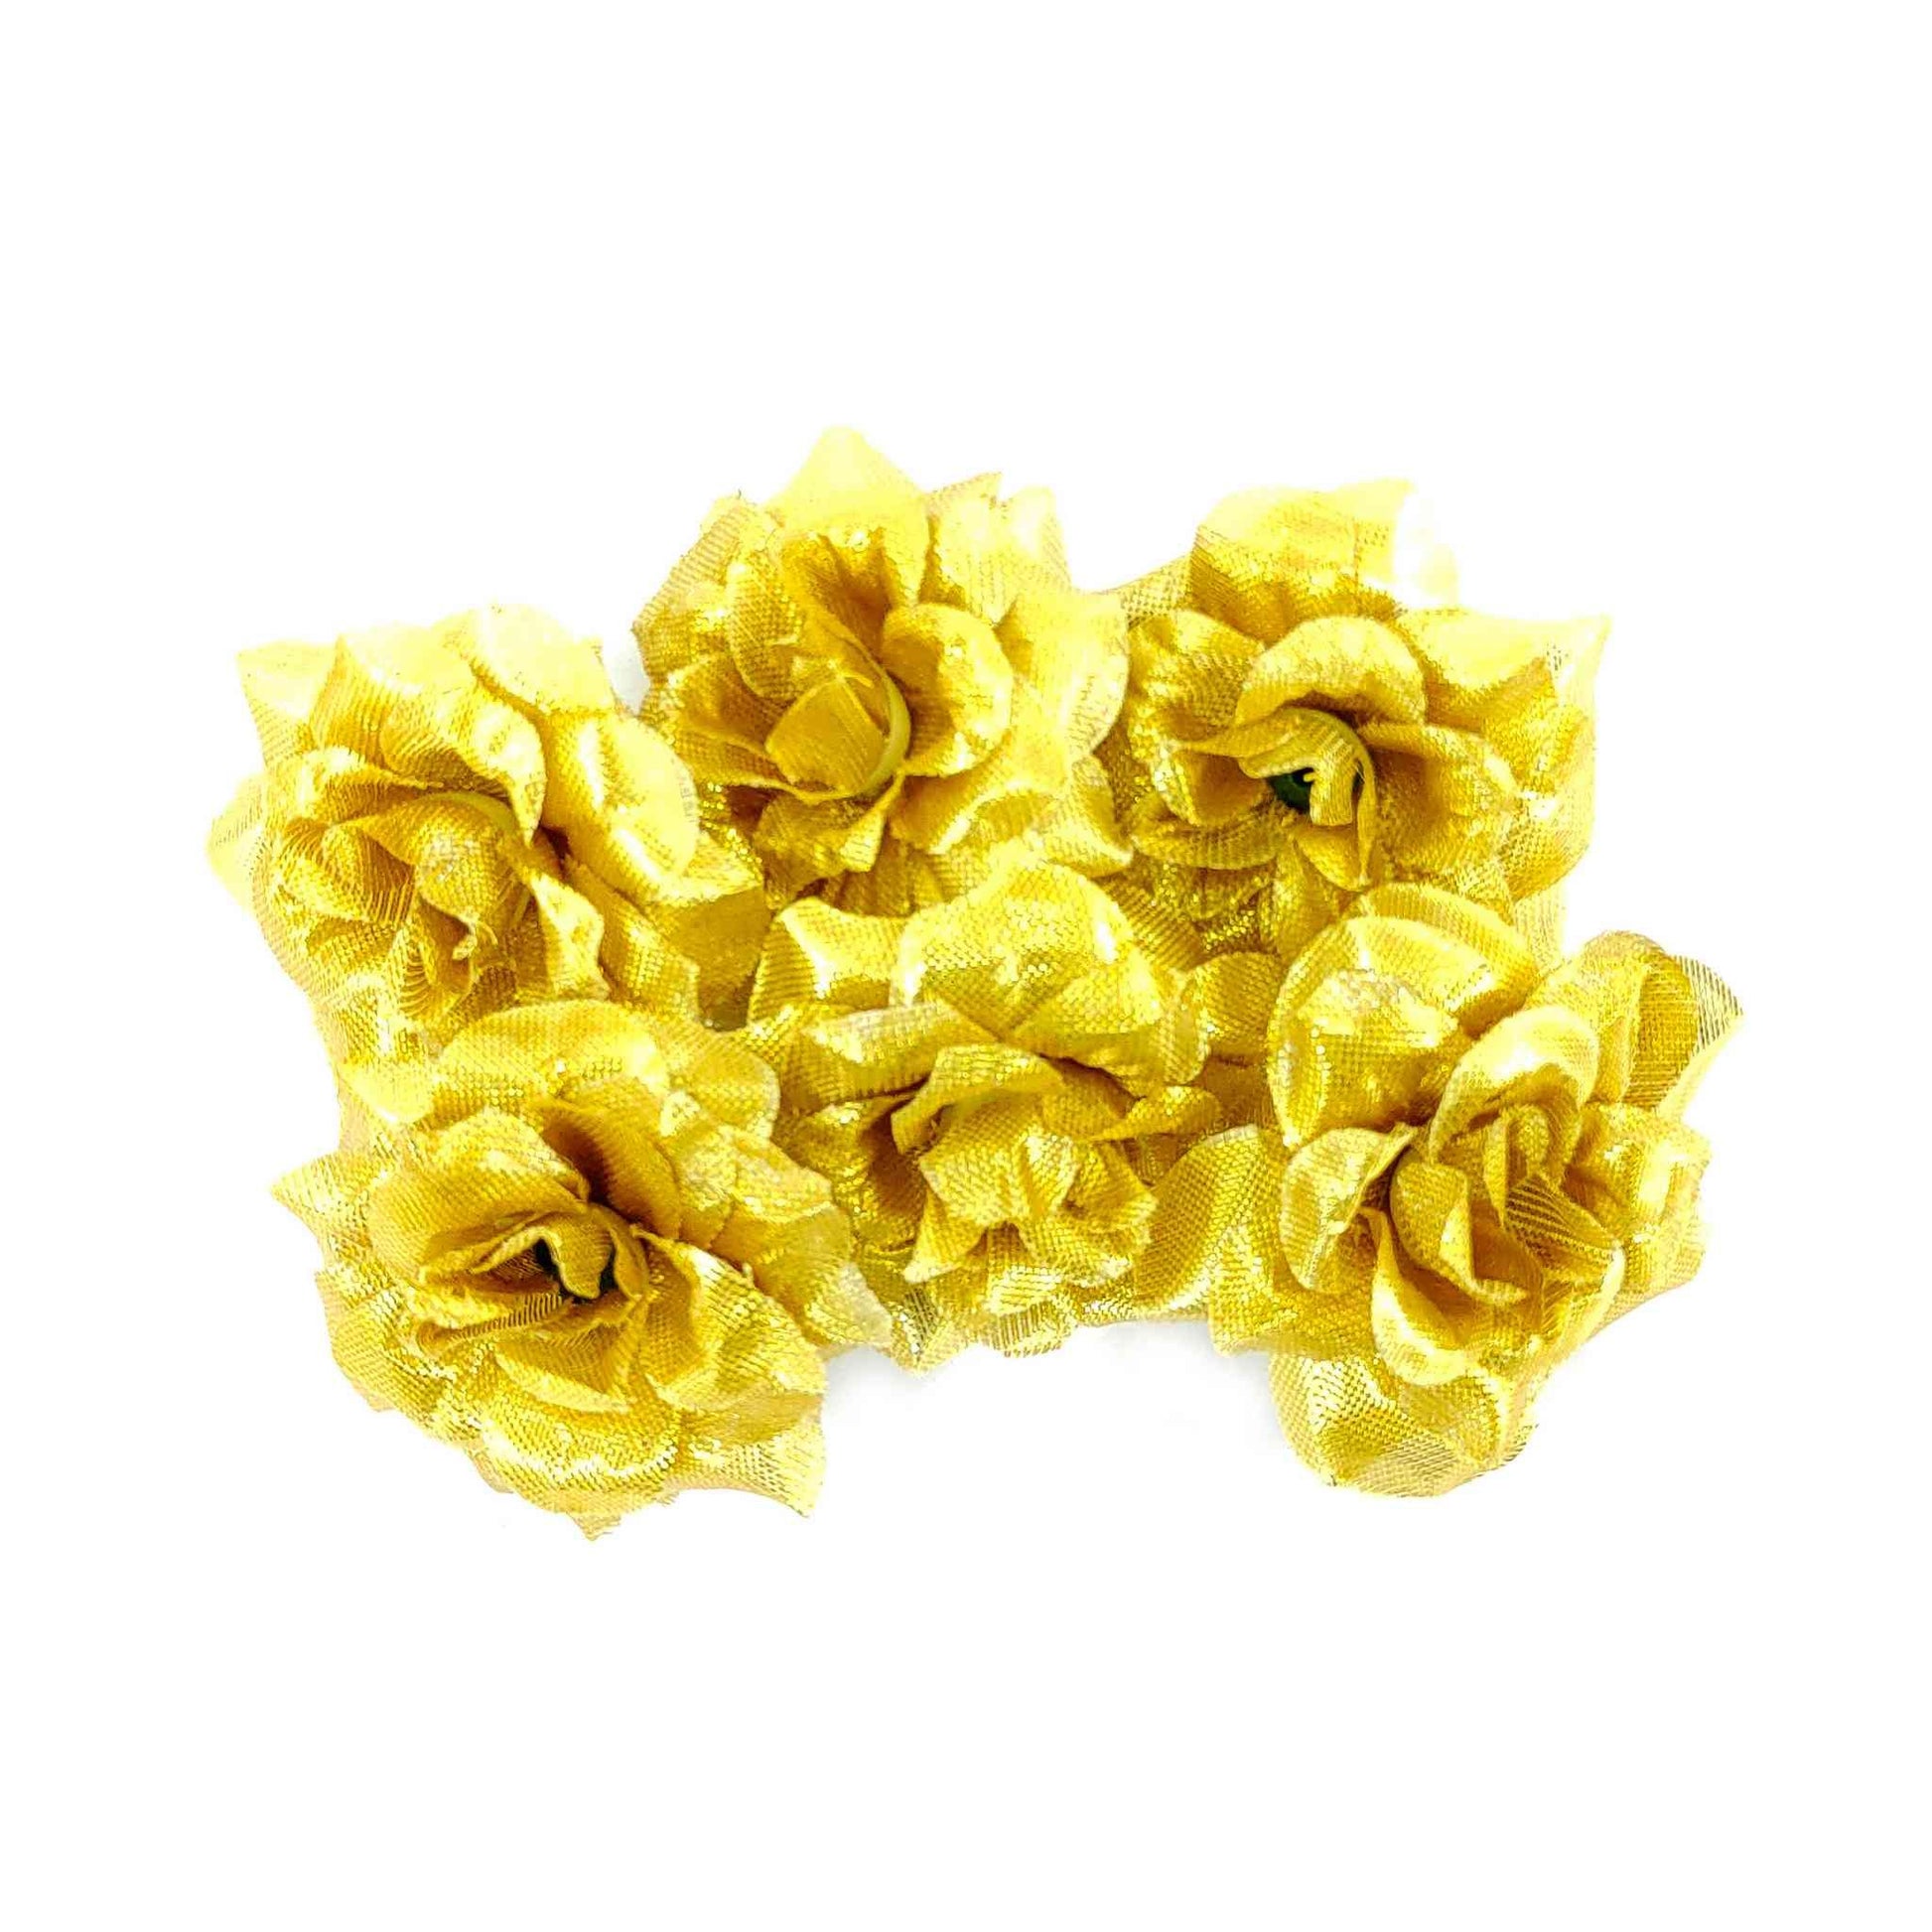 Indian Petals Beautiful Fabric Net Flowers for DIY Craft, Trouseau Packing or Decoration (Bunch of 12) - Design 38, Gold - Indian Petals